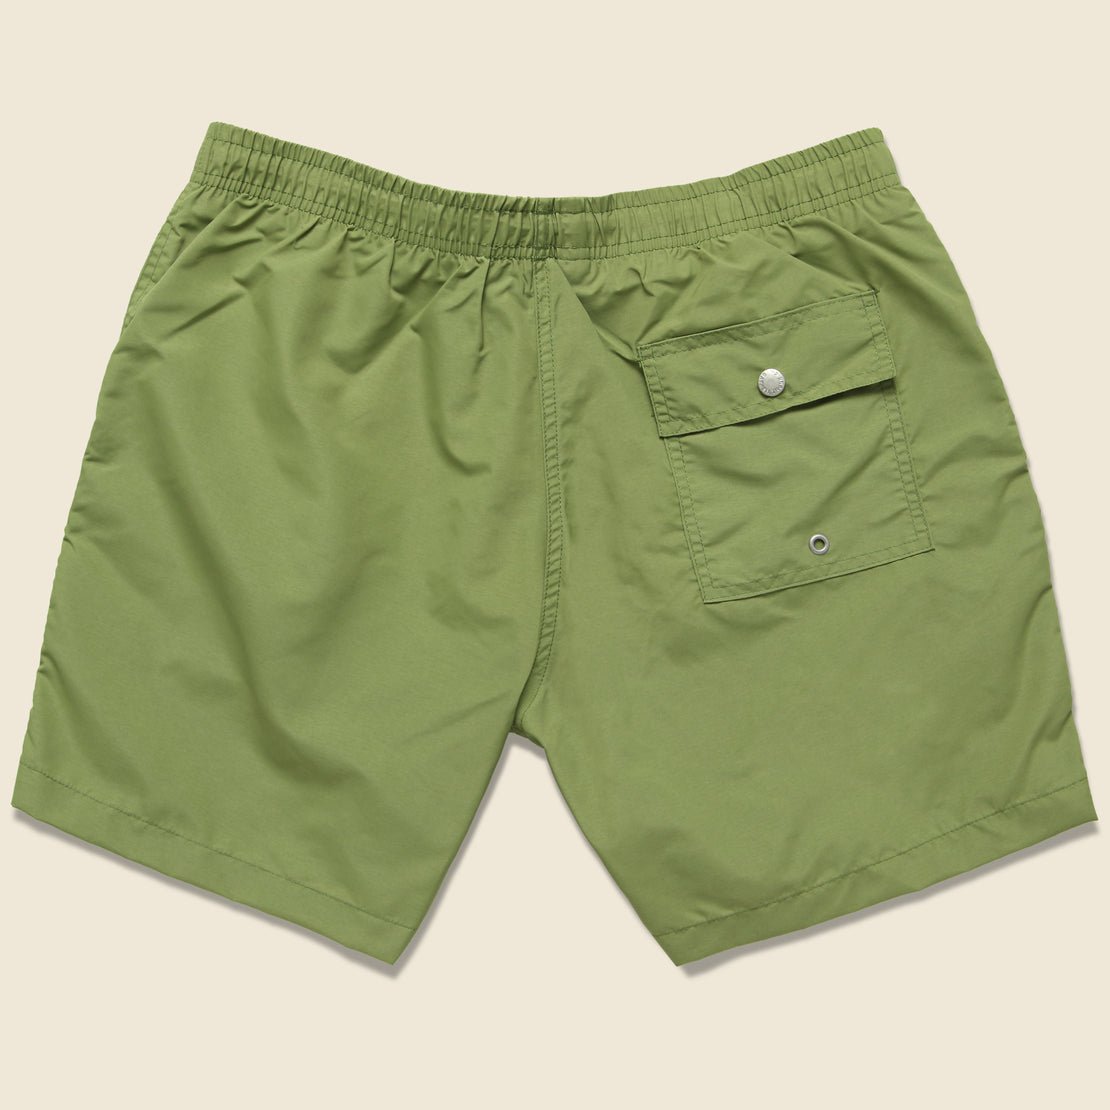 Solid Swim Trunk - Olive - Bather - STAG Provisions - Shorts - Swim